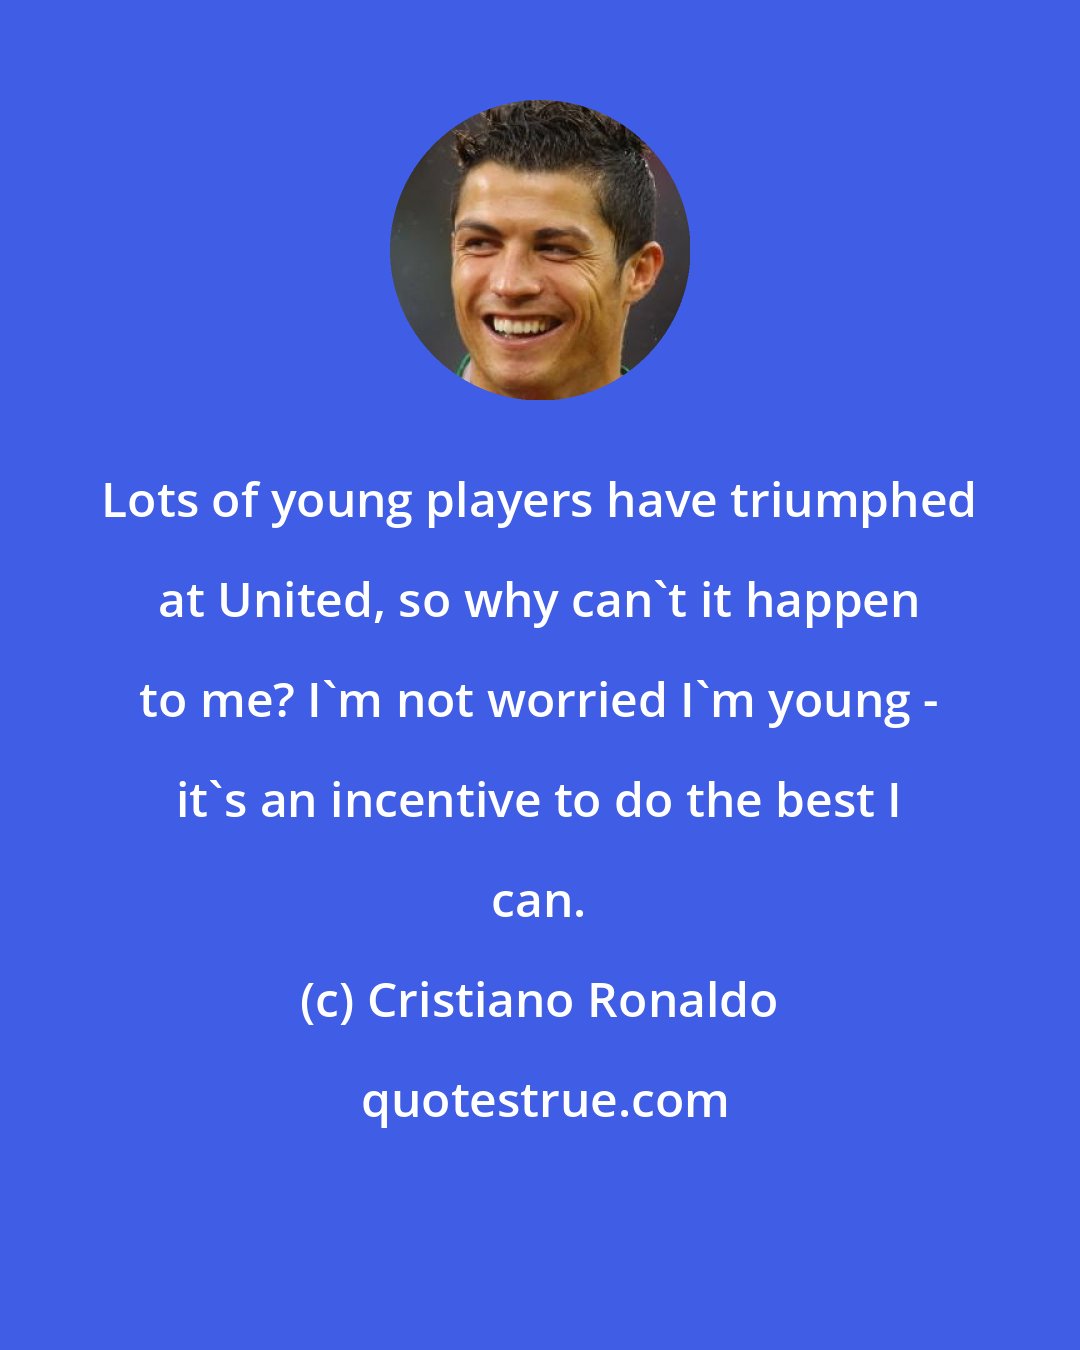 Cristiano Ronaldo: Lots of young players have triumphed at United, so why can't it happen to me? I'm not worried I'm young - it's an incentive to do the best I can.